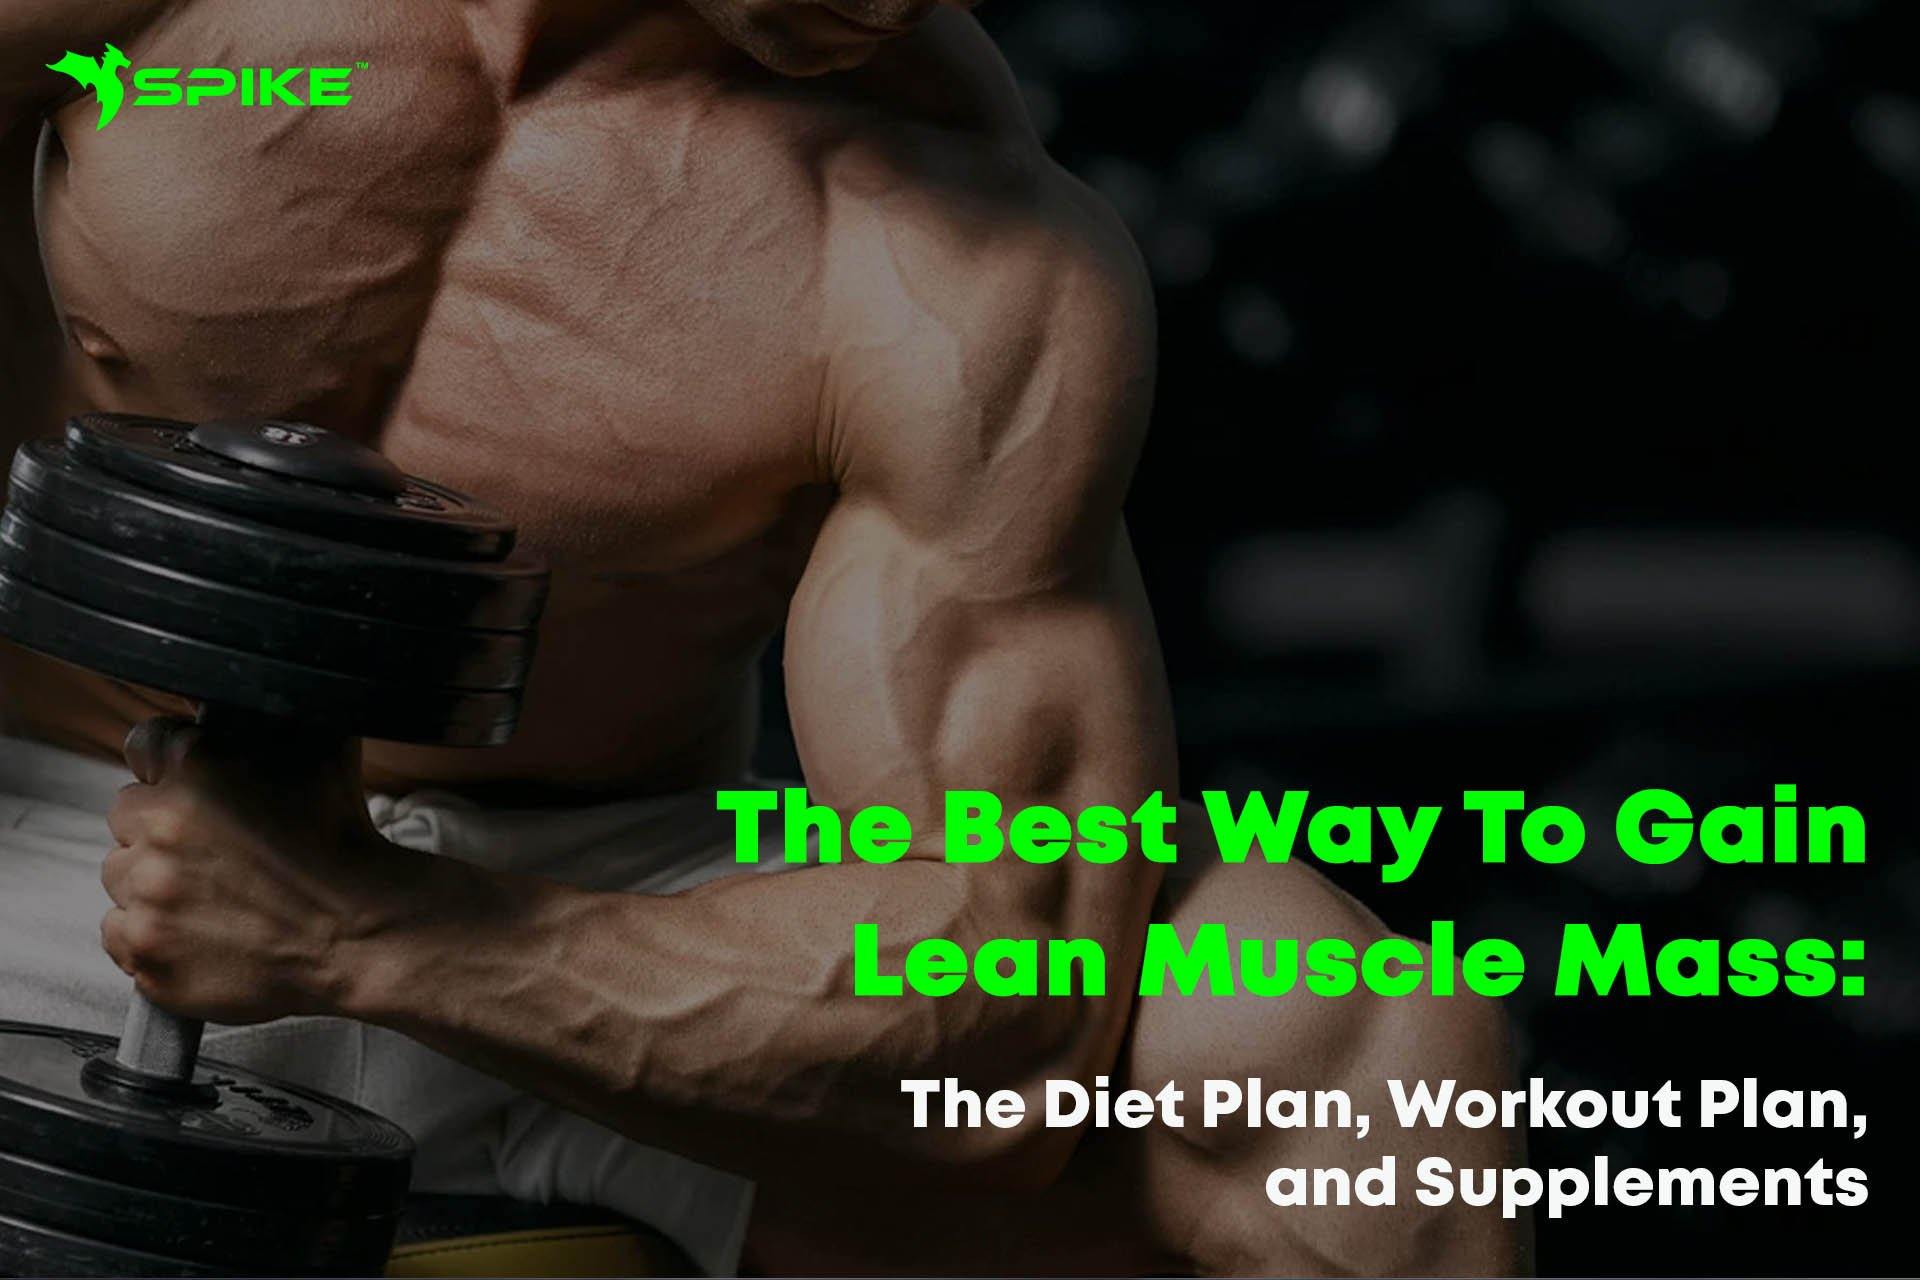 The Best Way To Gain Lean Muscle Mass: The Diet Plan, Workout Plan, and Supplements - Spike